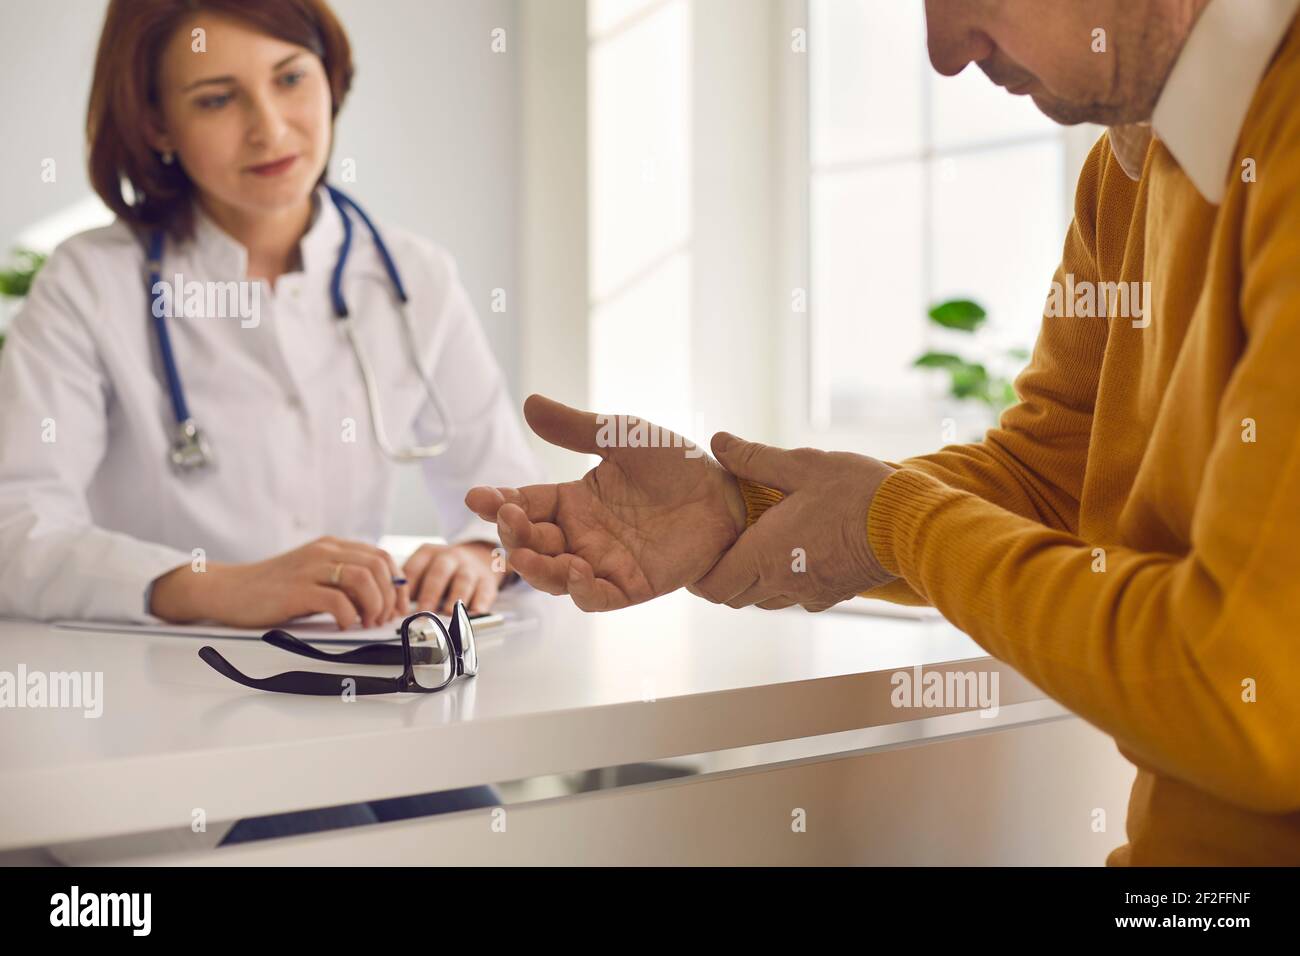 Patient suffering from wrist pain complaints on ache symptom to doctor Stock Photo